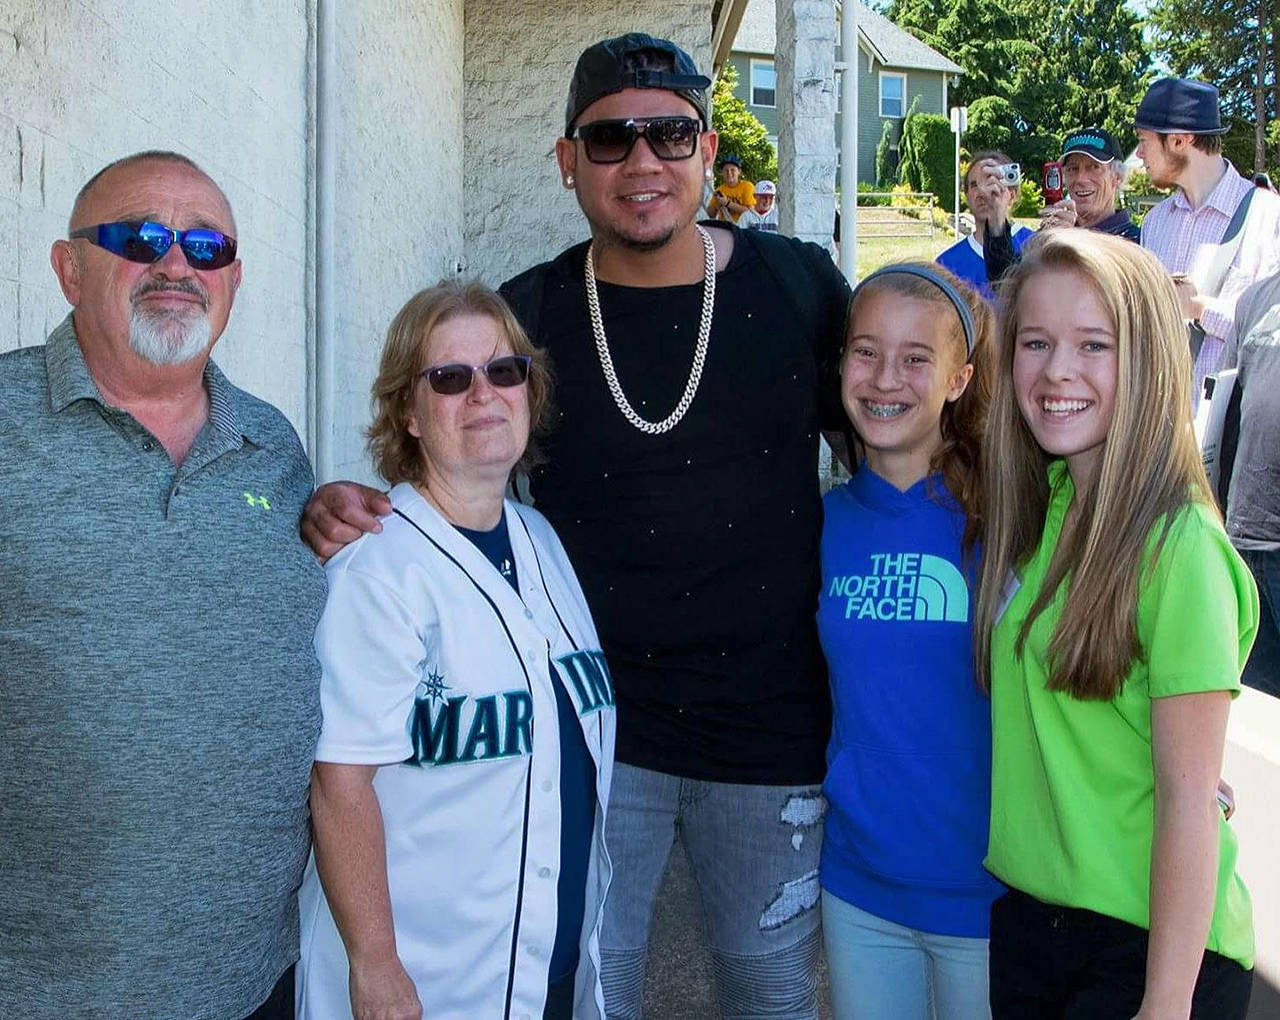 Before the majors, King Felix stamped his legacy in Everett